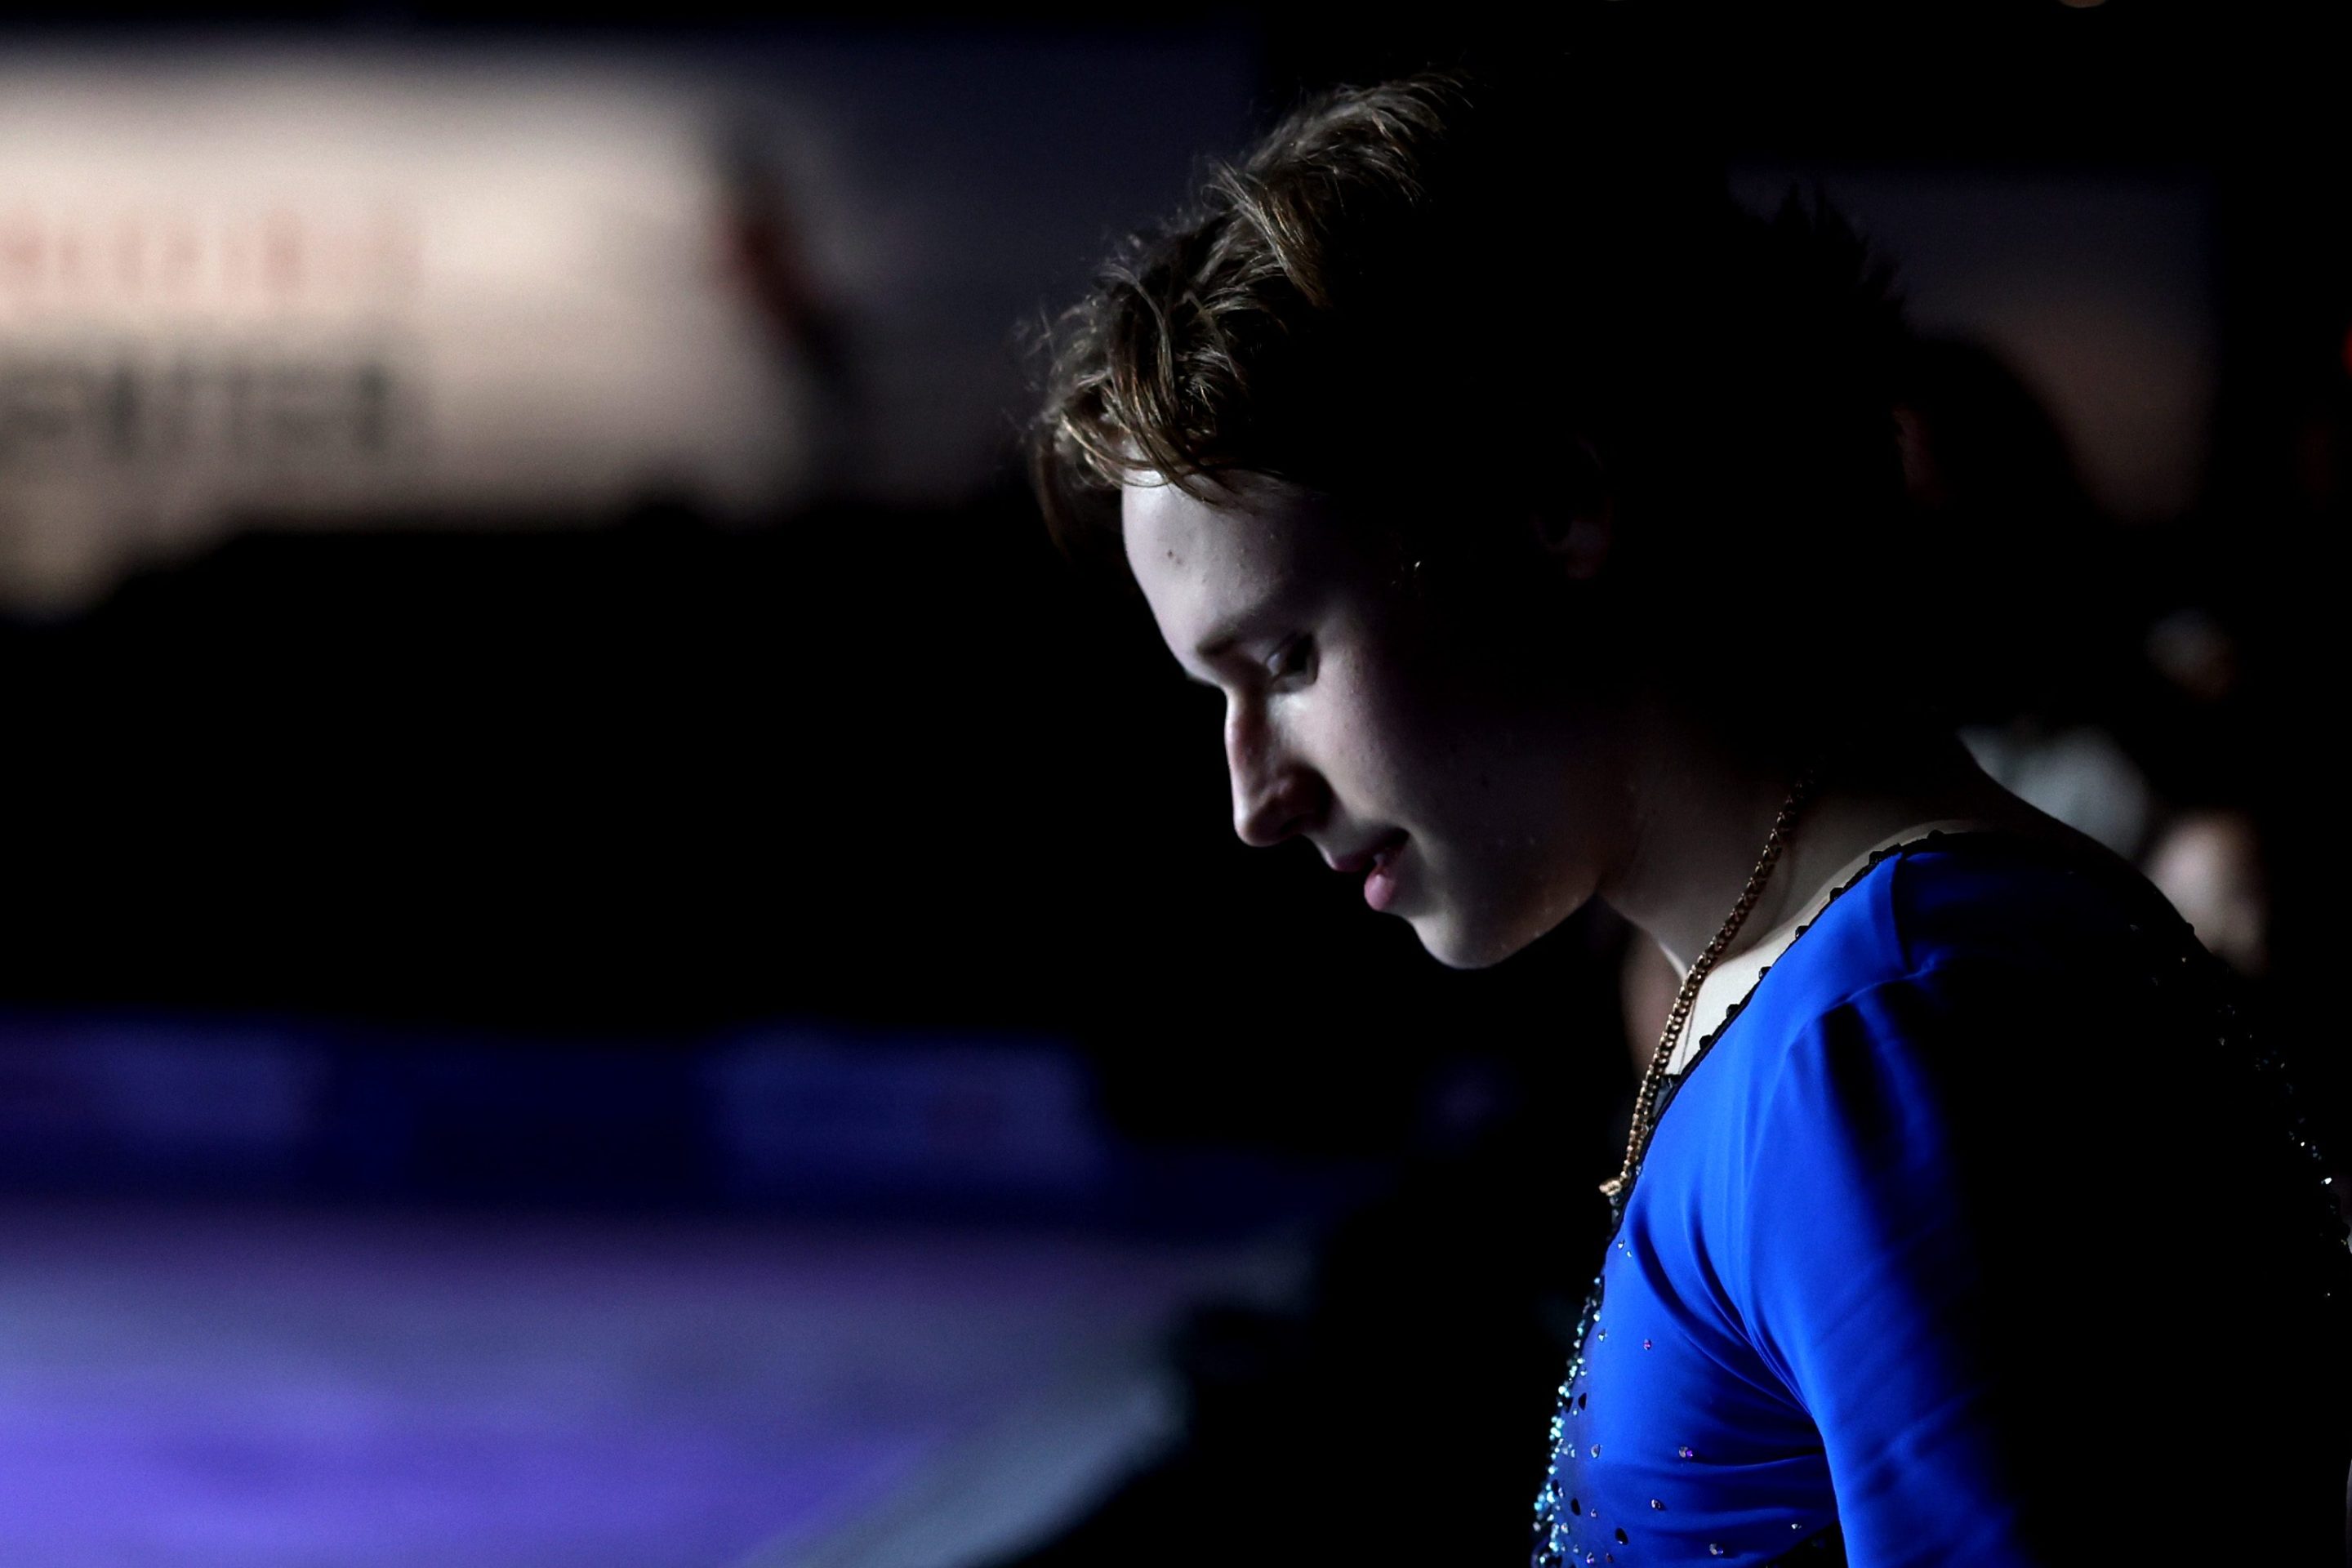 Ilia Malinin of the United States prepares to take the ice to recieve his gold medal in the ISU Grand Prix of Figure Skating - Skate America at The Skating Club of Boston on October 22, 2022 in Norwood, Massachusetts.